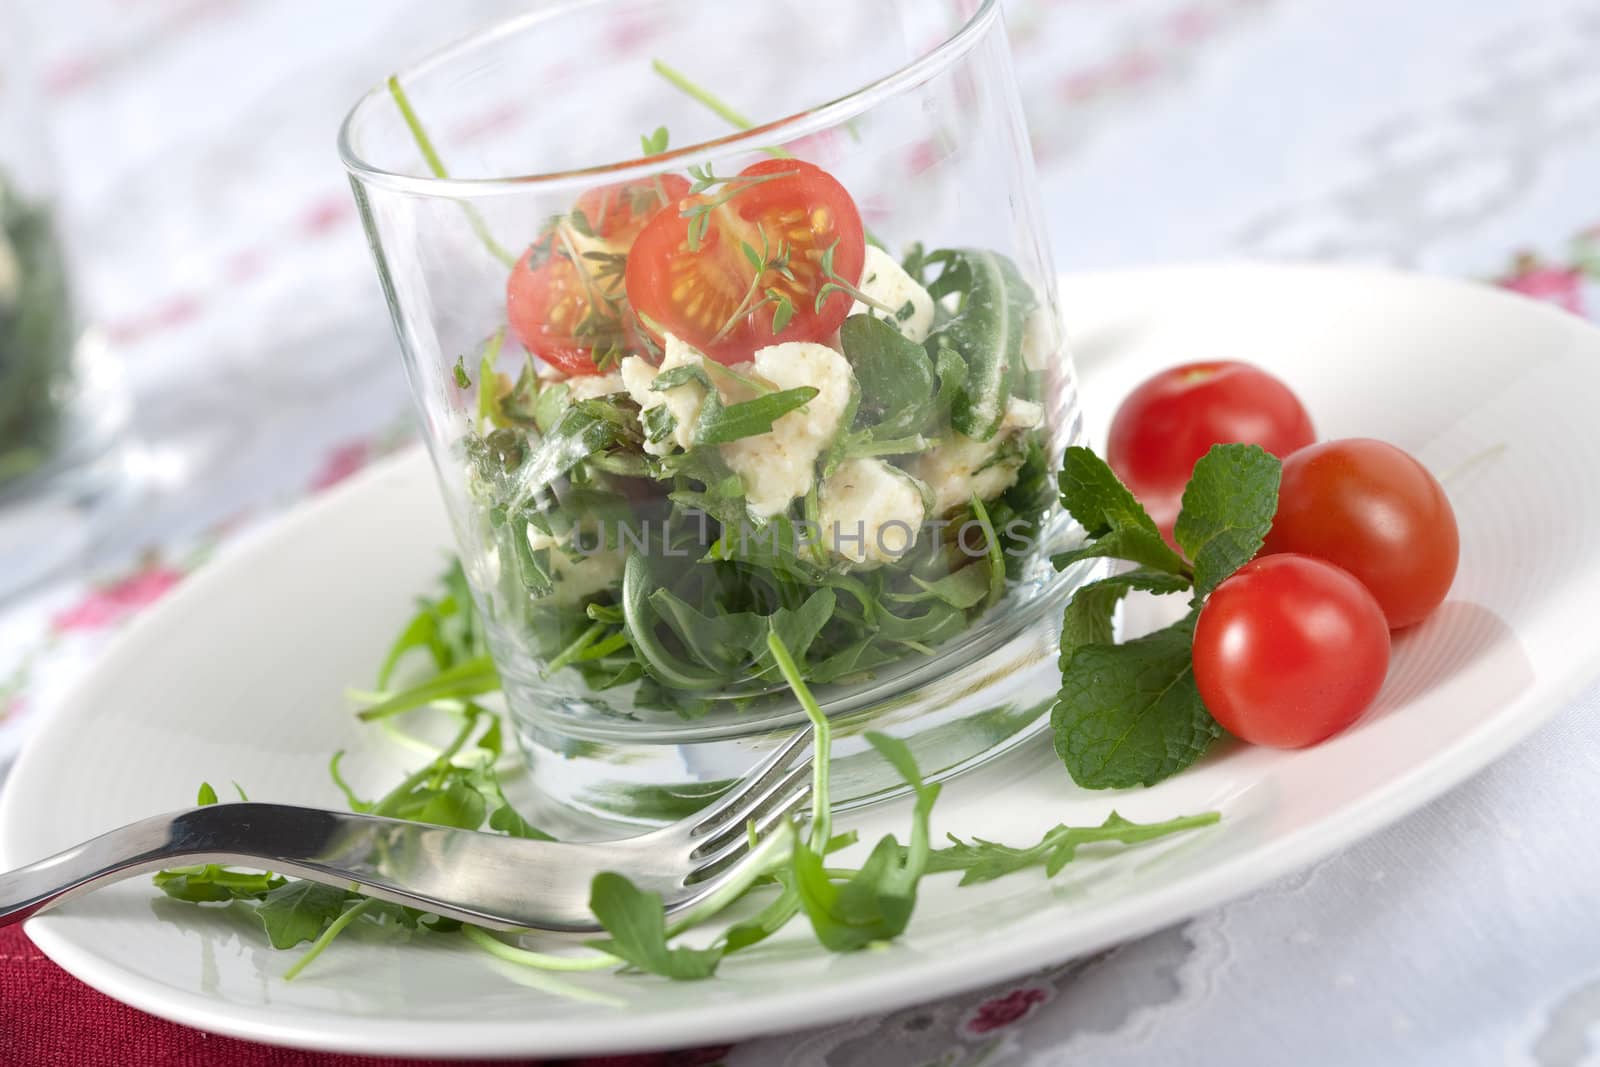 Small salad with feta and mozarella served in a glass